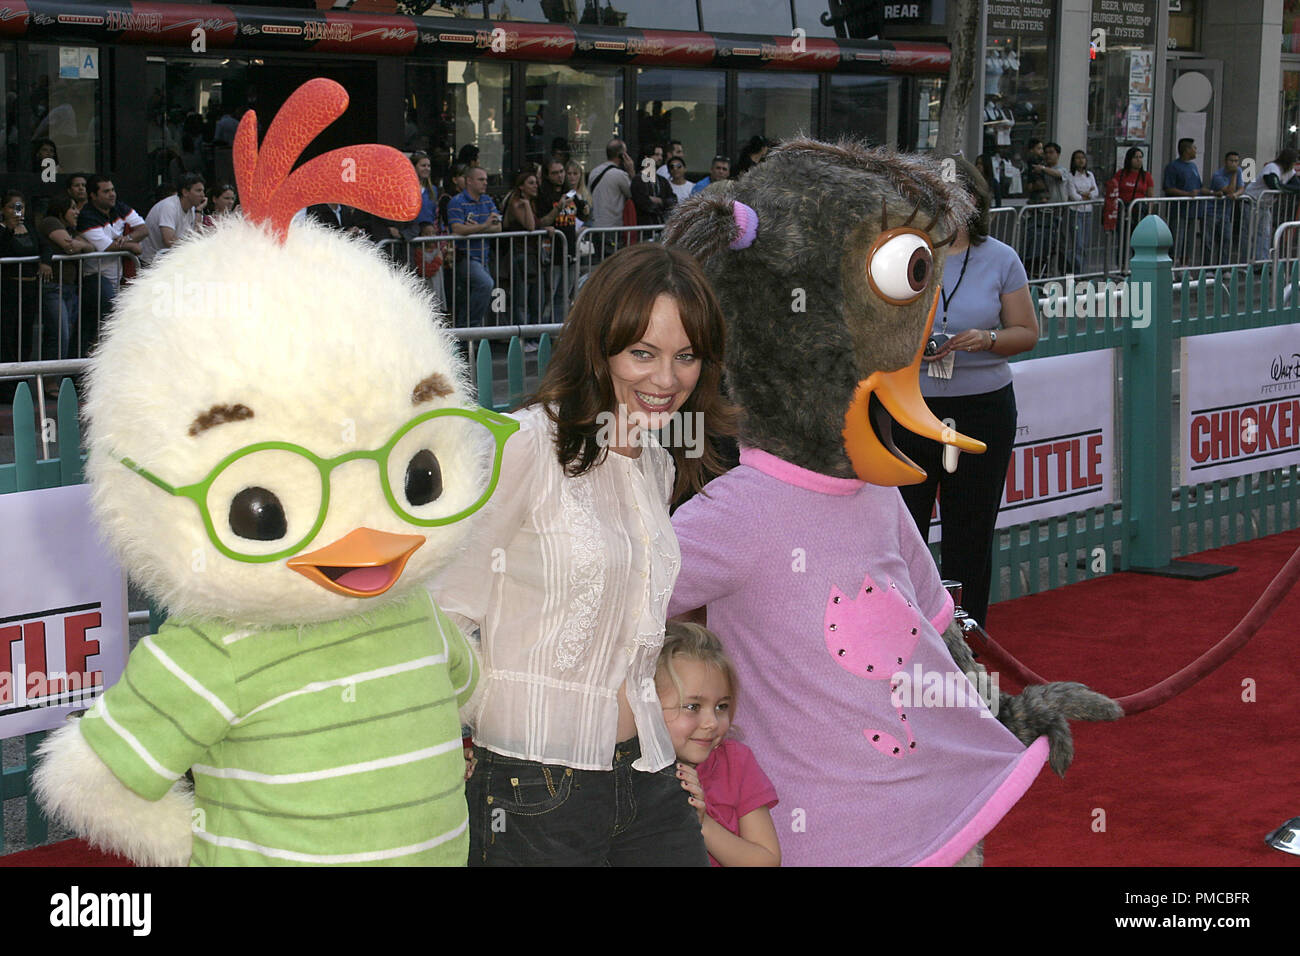 'Chicken Little' (Premiere) Melinda Clarke and daughter Kathryn Grace posing with Chicken Little and The Ugly Duckling 10-30-2005 / El Capitan Theater / Hollywood, CA / Walt Disney Pictures / Photo by Joseph Martinez / PictureLux  File Reference # 22520 0056-picturelux  For Editorial Use Only - All Rights Reserved Stock Photo